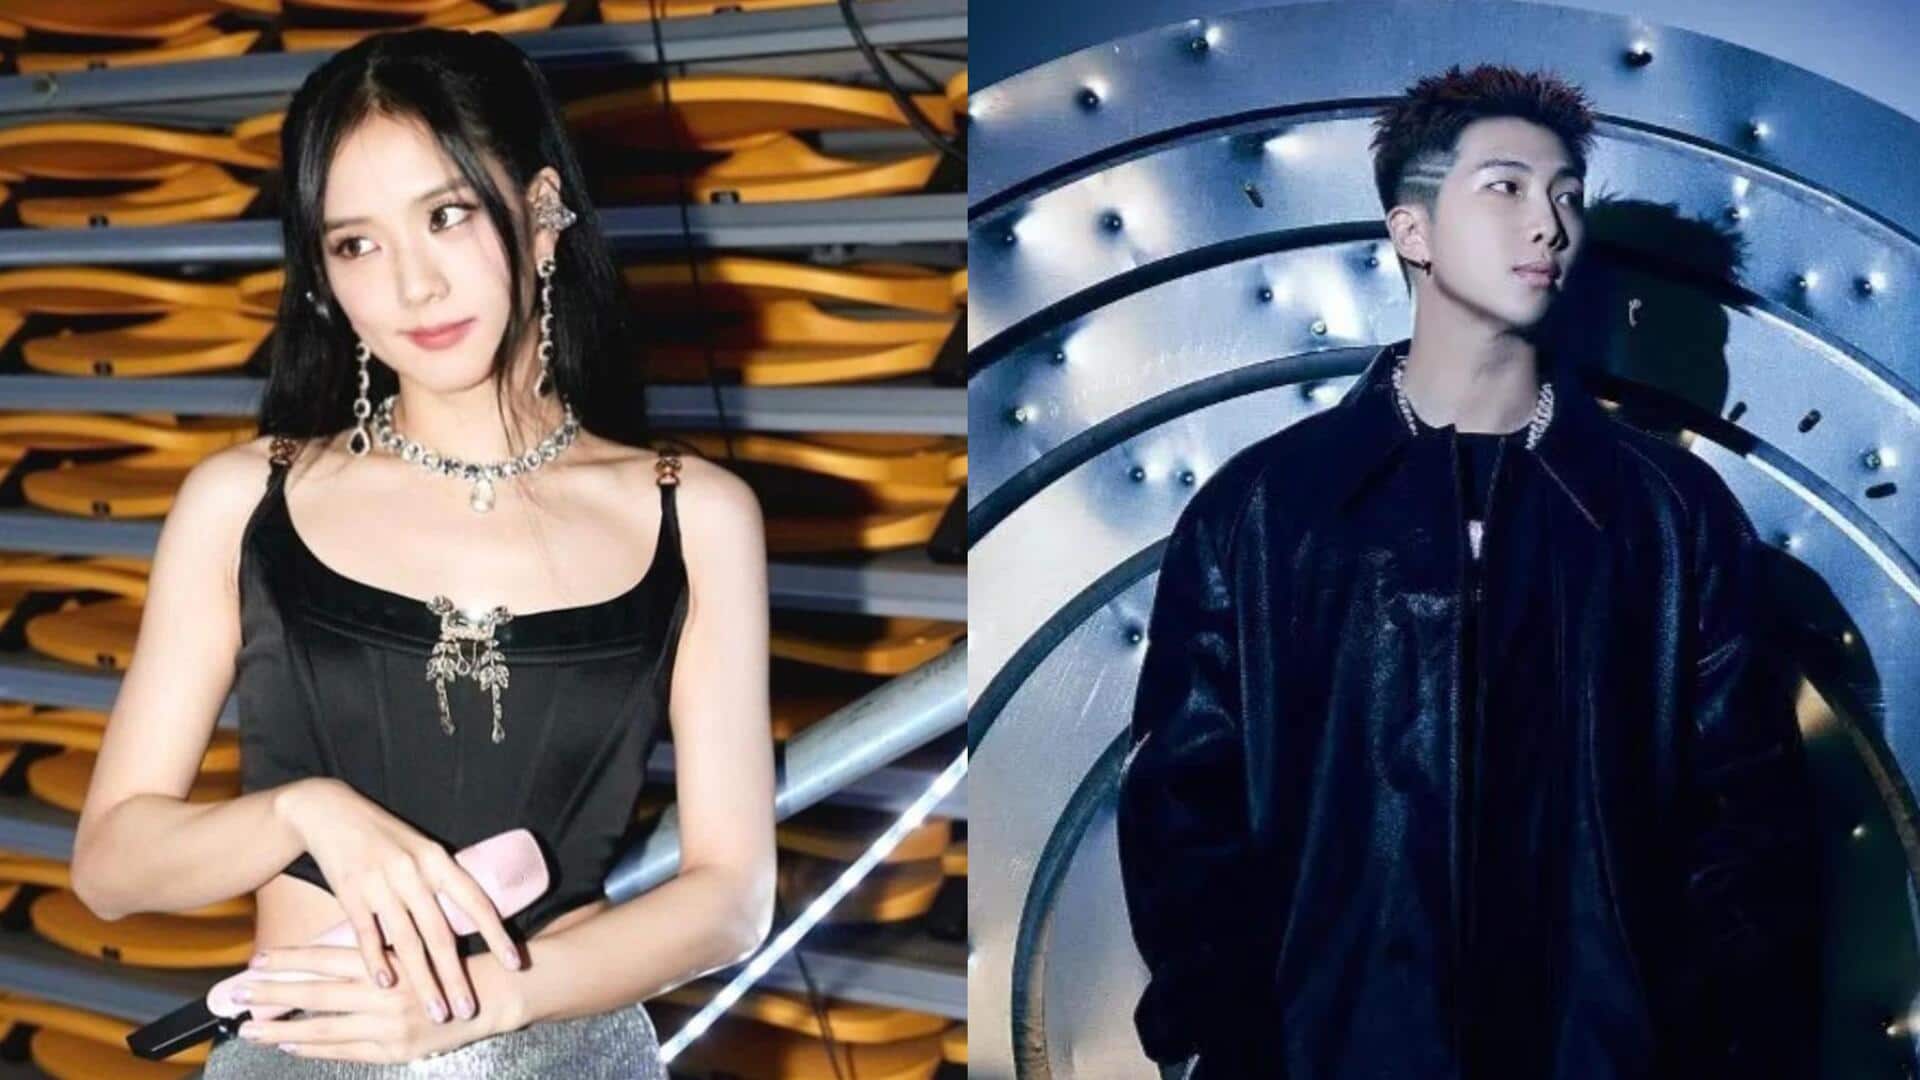 Frank Ocean's 'Bad Religion' triggers trouble for BTS's RM-BLACKPINK's Jisoo